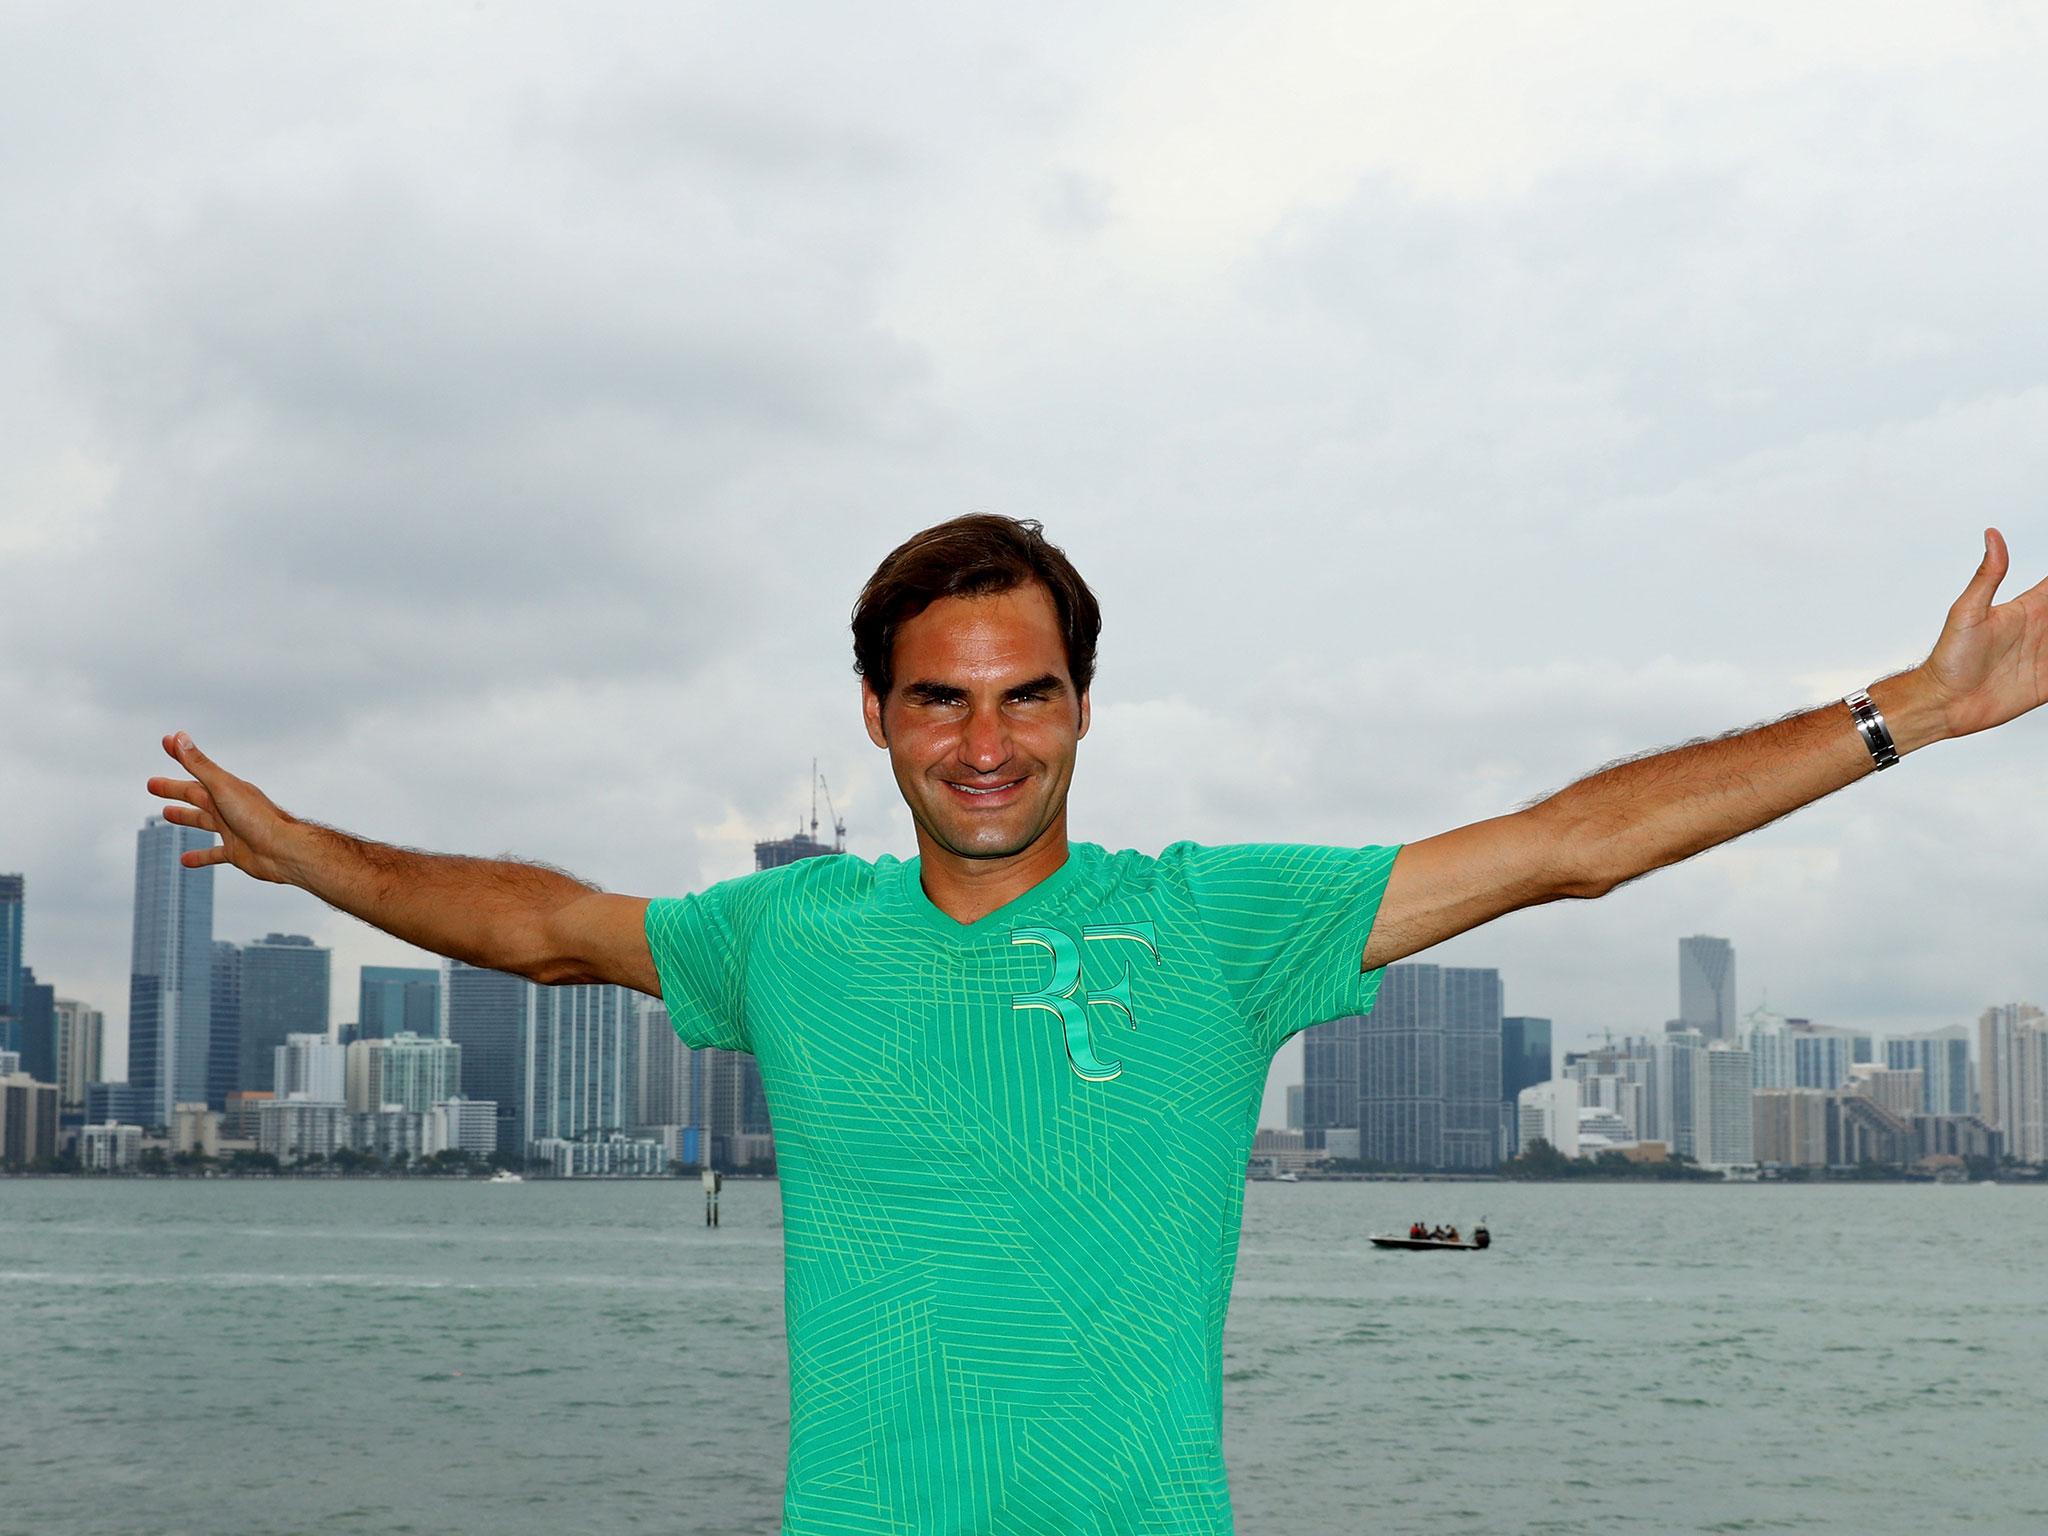 Roger Federer continued his remarkable 2017 by winning in Miami